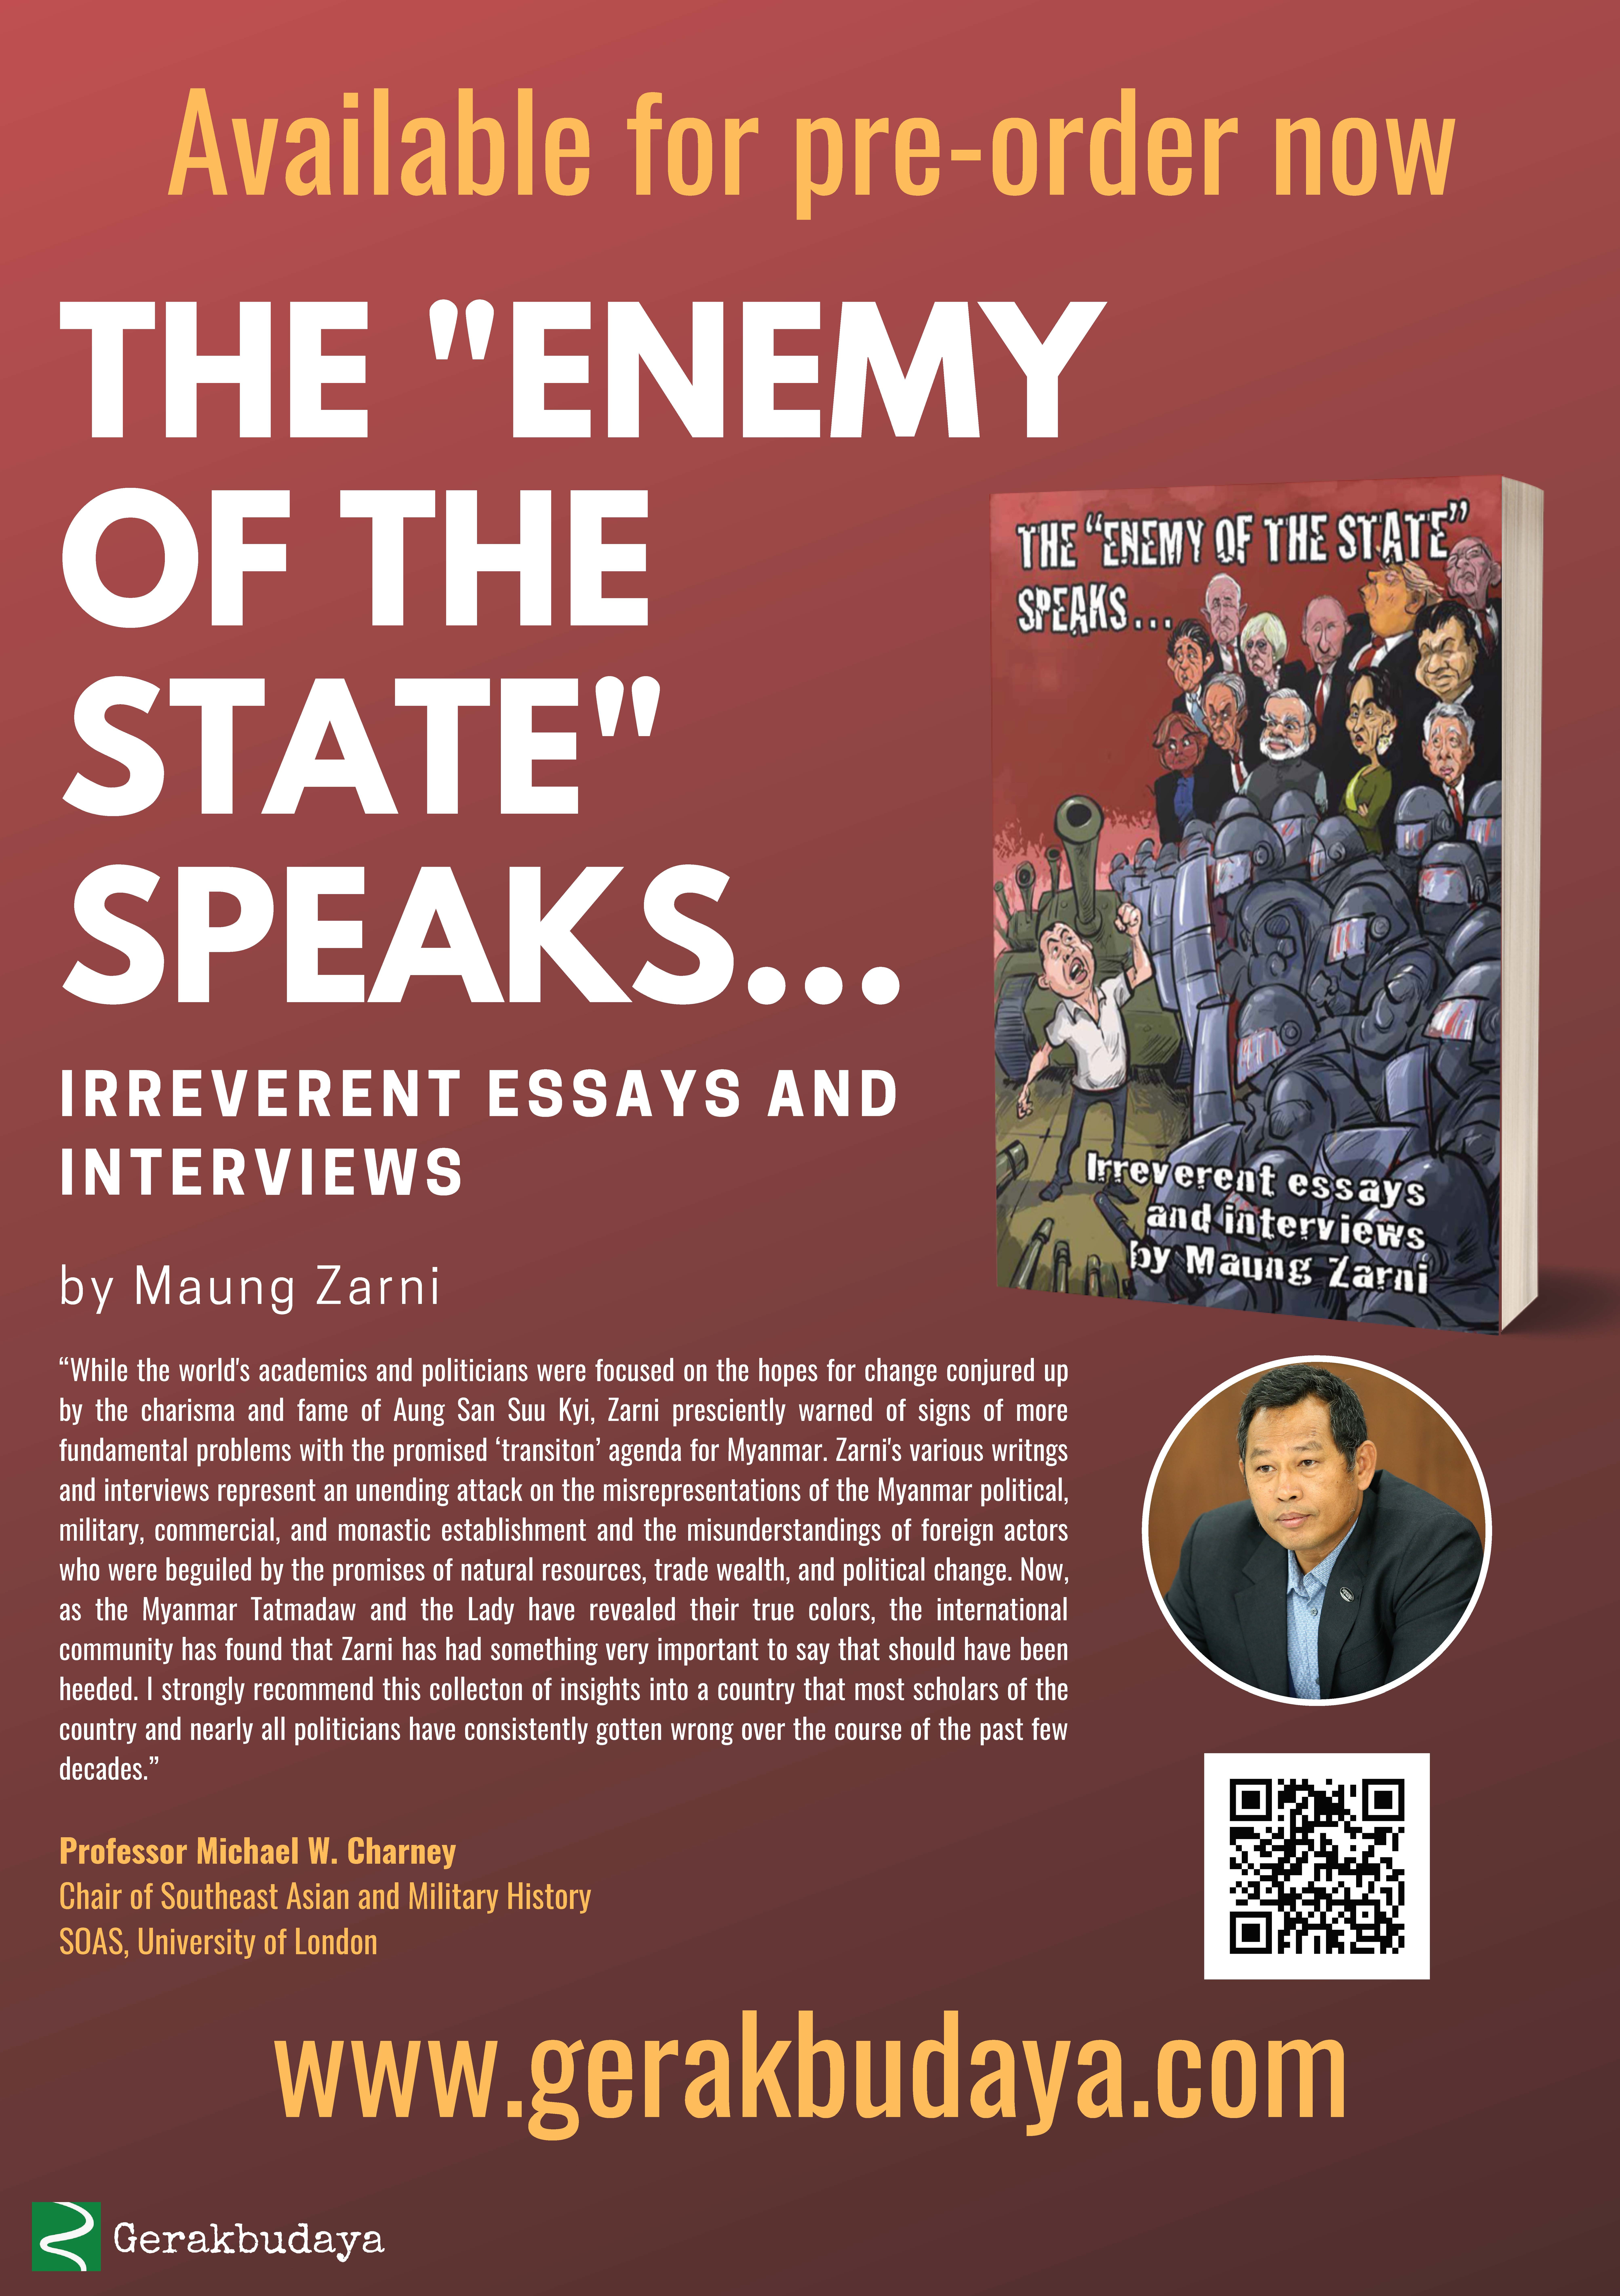 The "Enemy of the State" Speaks ... Irreverent Essays and Interviews